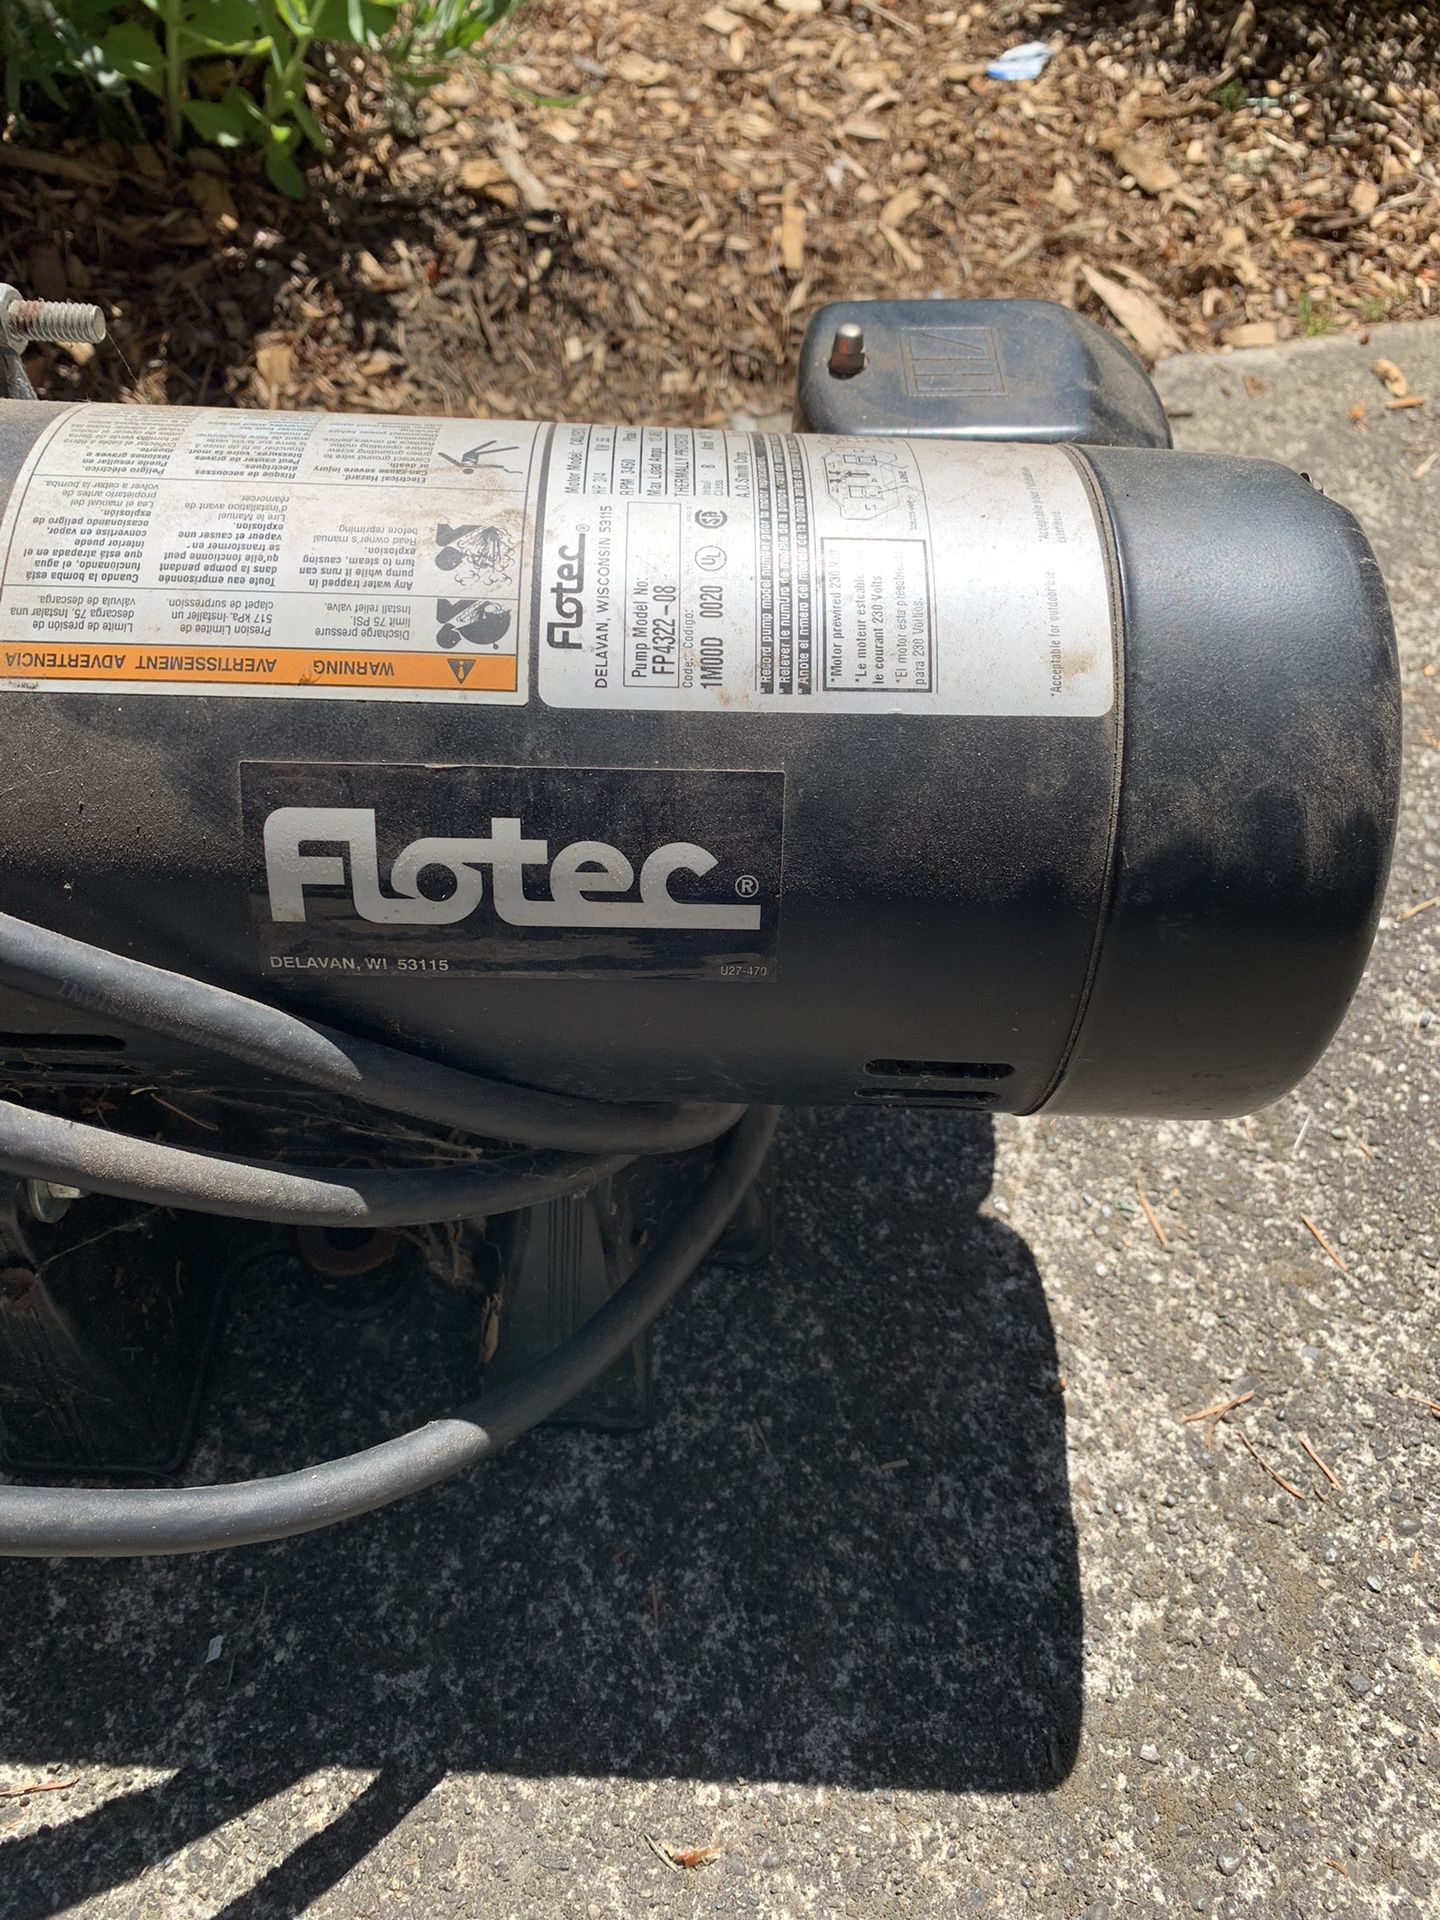 Flotec Pump For Pond OrIrrigation Or Fountain 